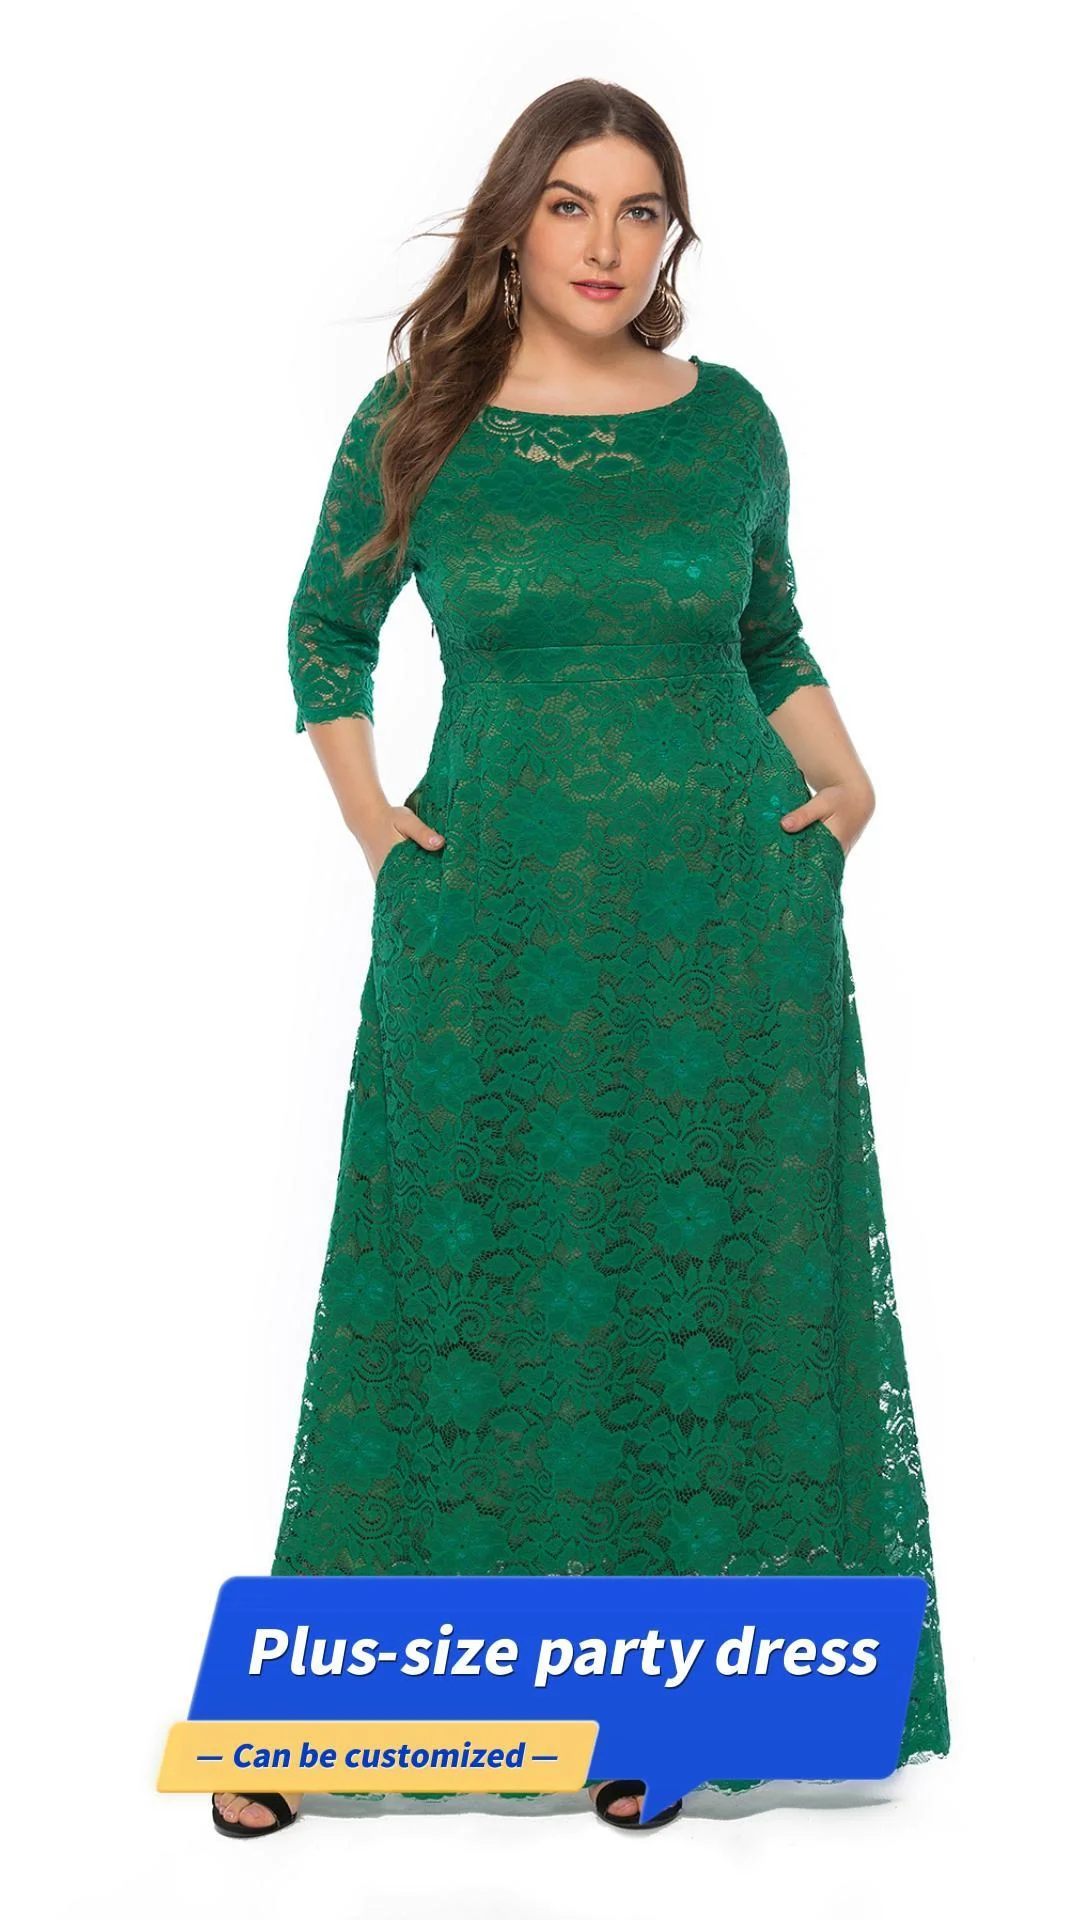 Emerald Green Lace Dress In Ghana For Sale